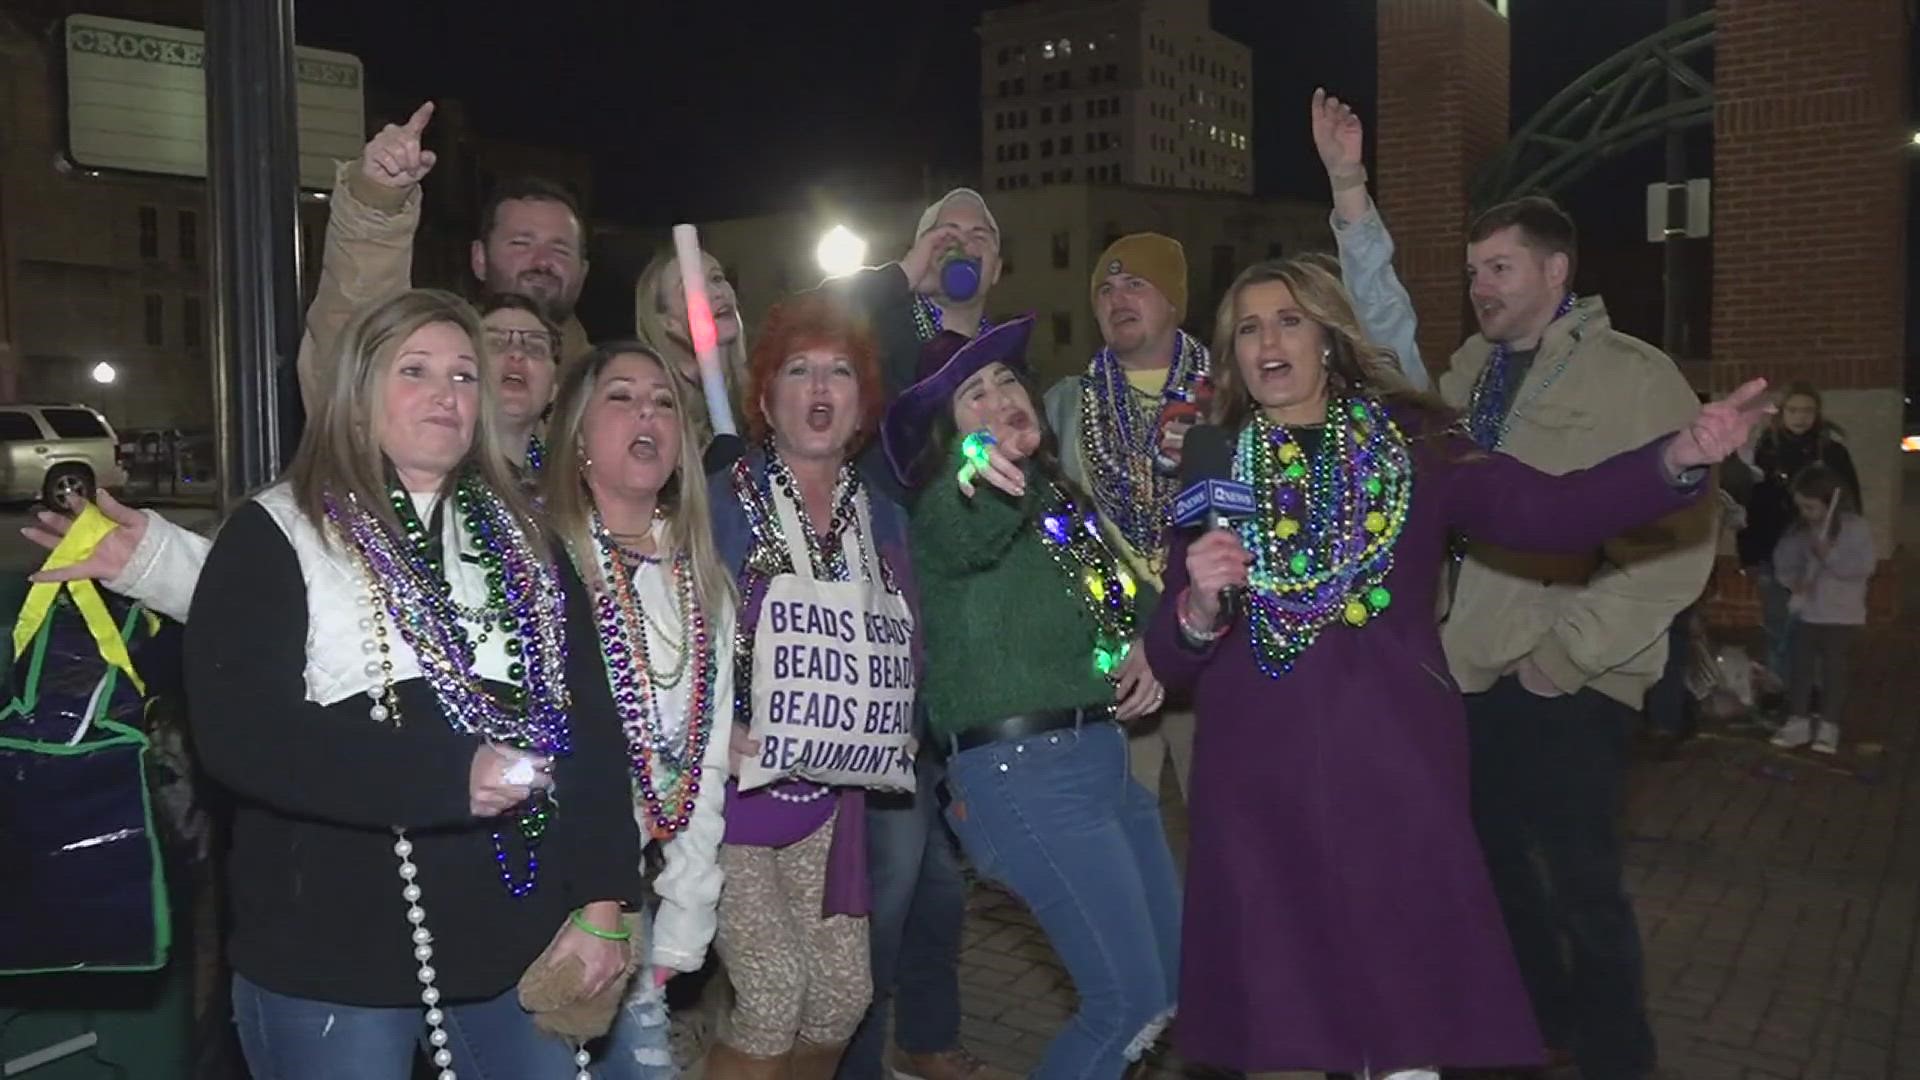 This was Cameron Sibert's first Mardi Gras experience. Beads flew and shouts of joy were hard.